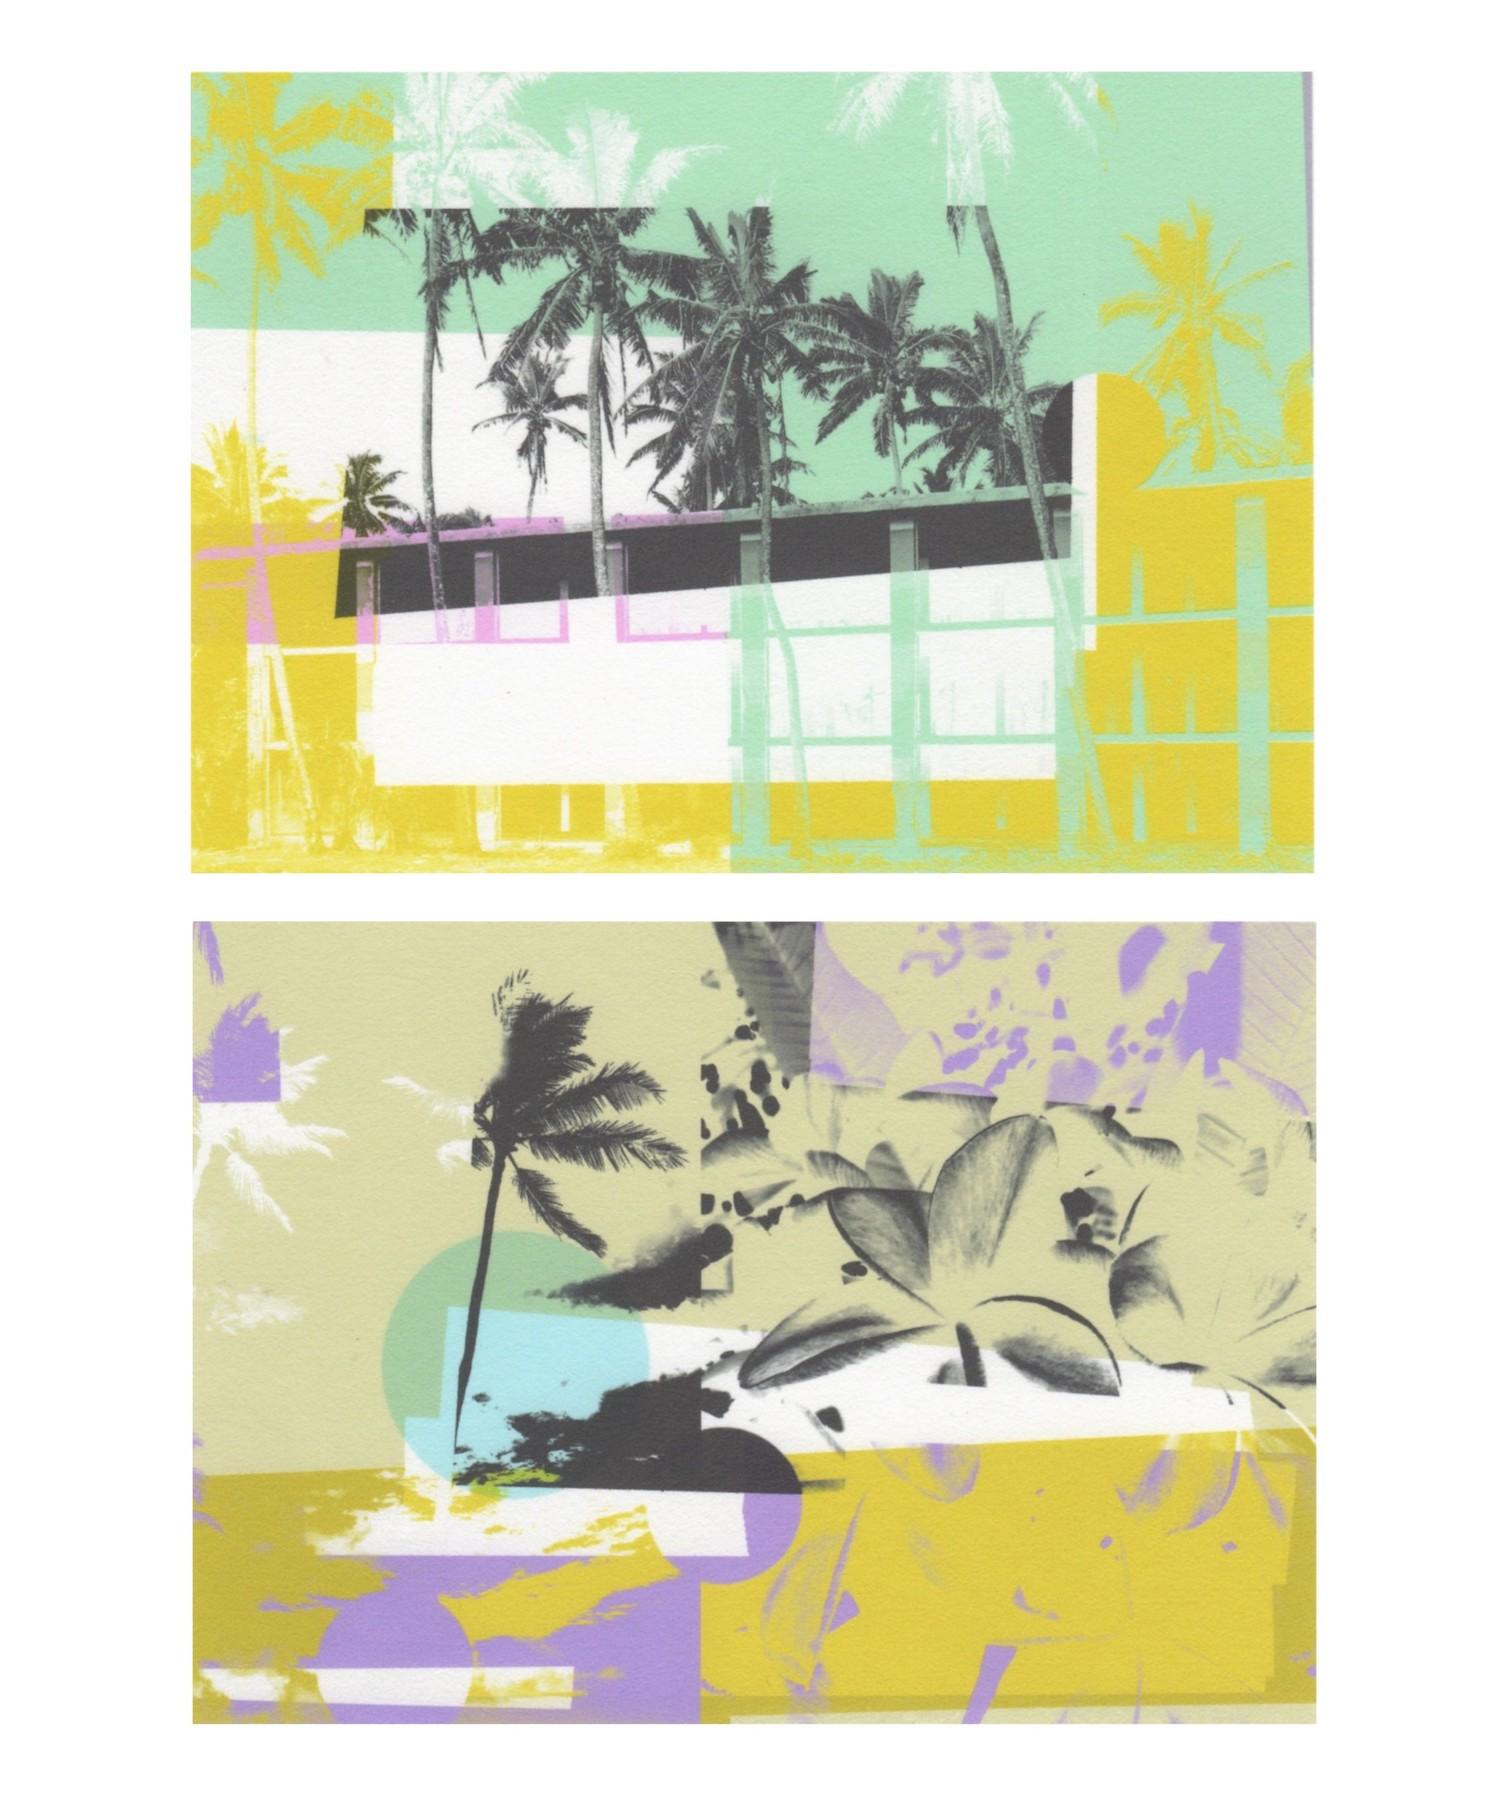 "Greetings from Hawaii", abstract, architecture, flora, yellow, green, print